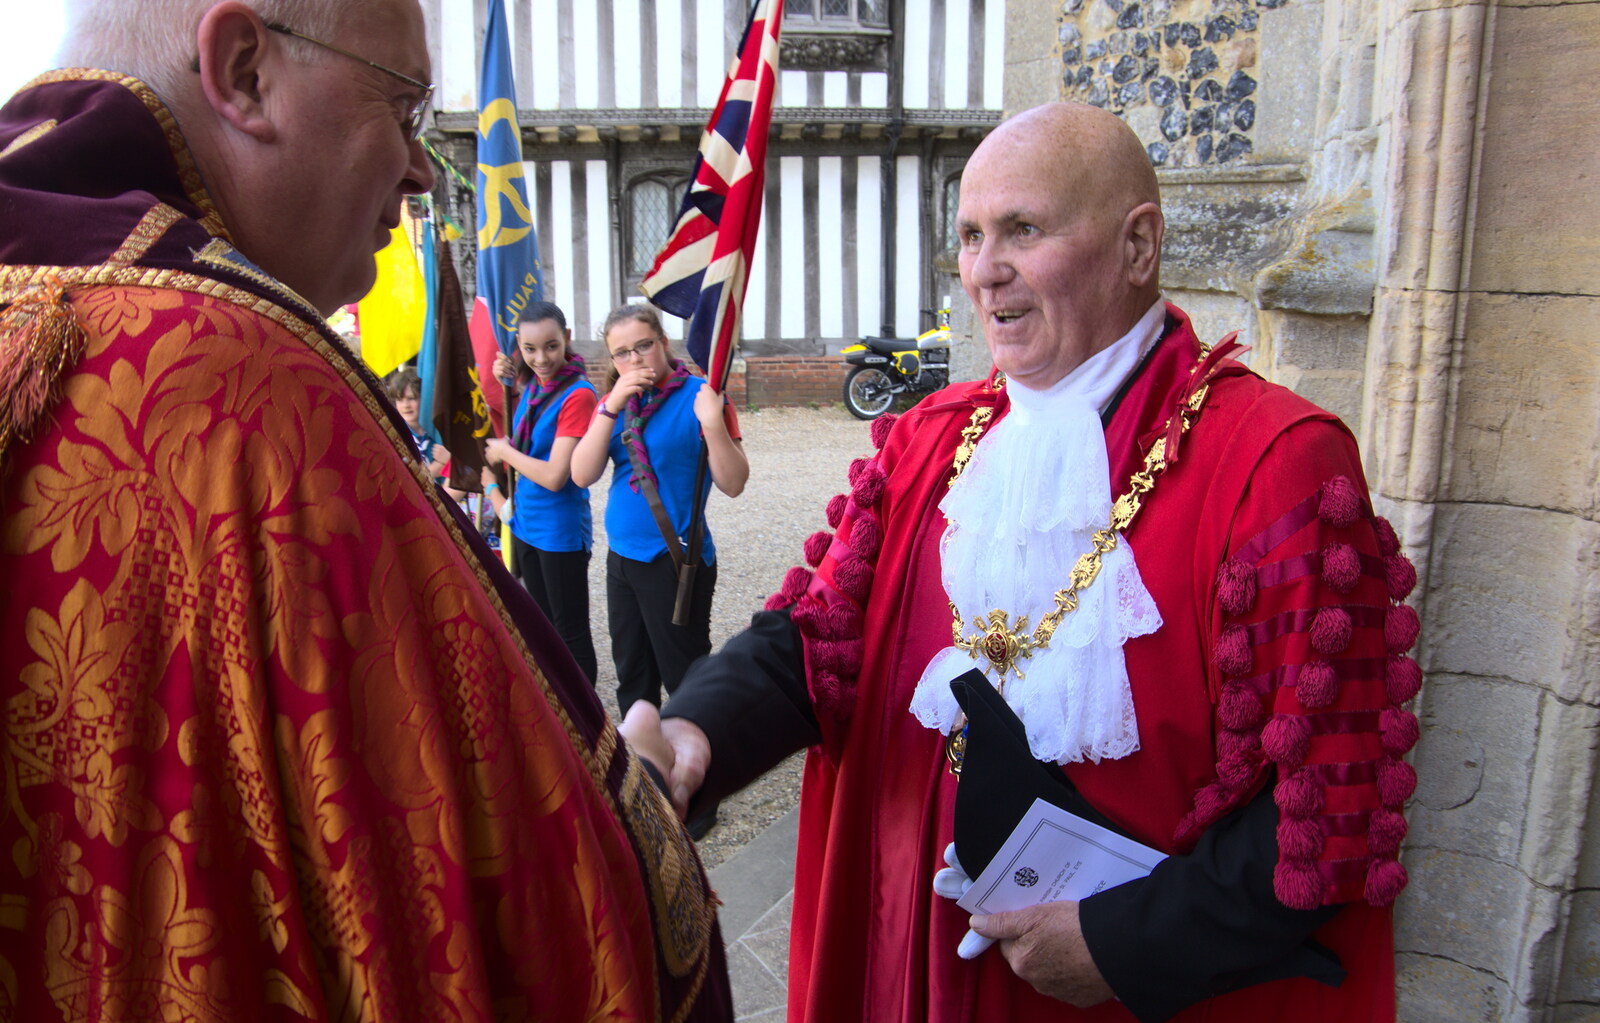 The Bish shakes hands with the mayor from The Mayor Making Parade, Eye, Suffolk - 24th June 2018